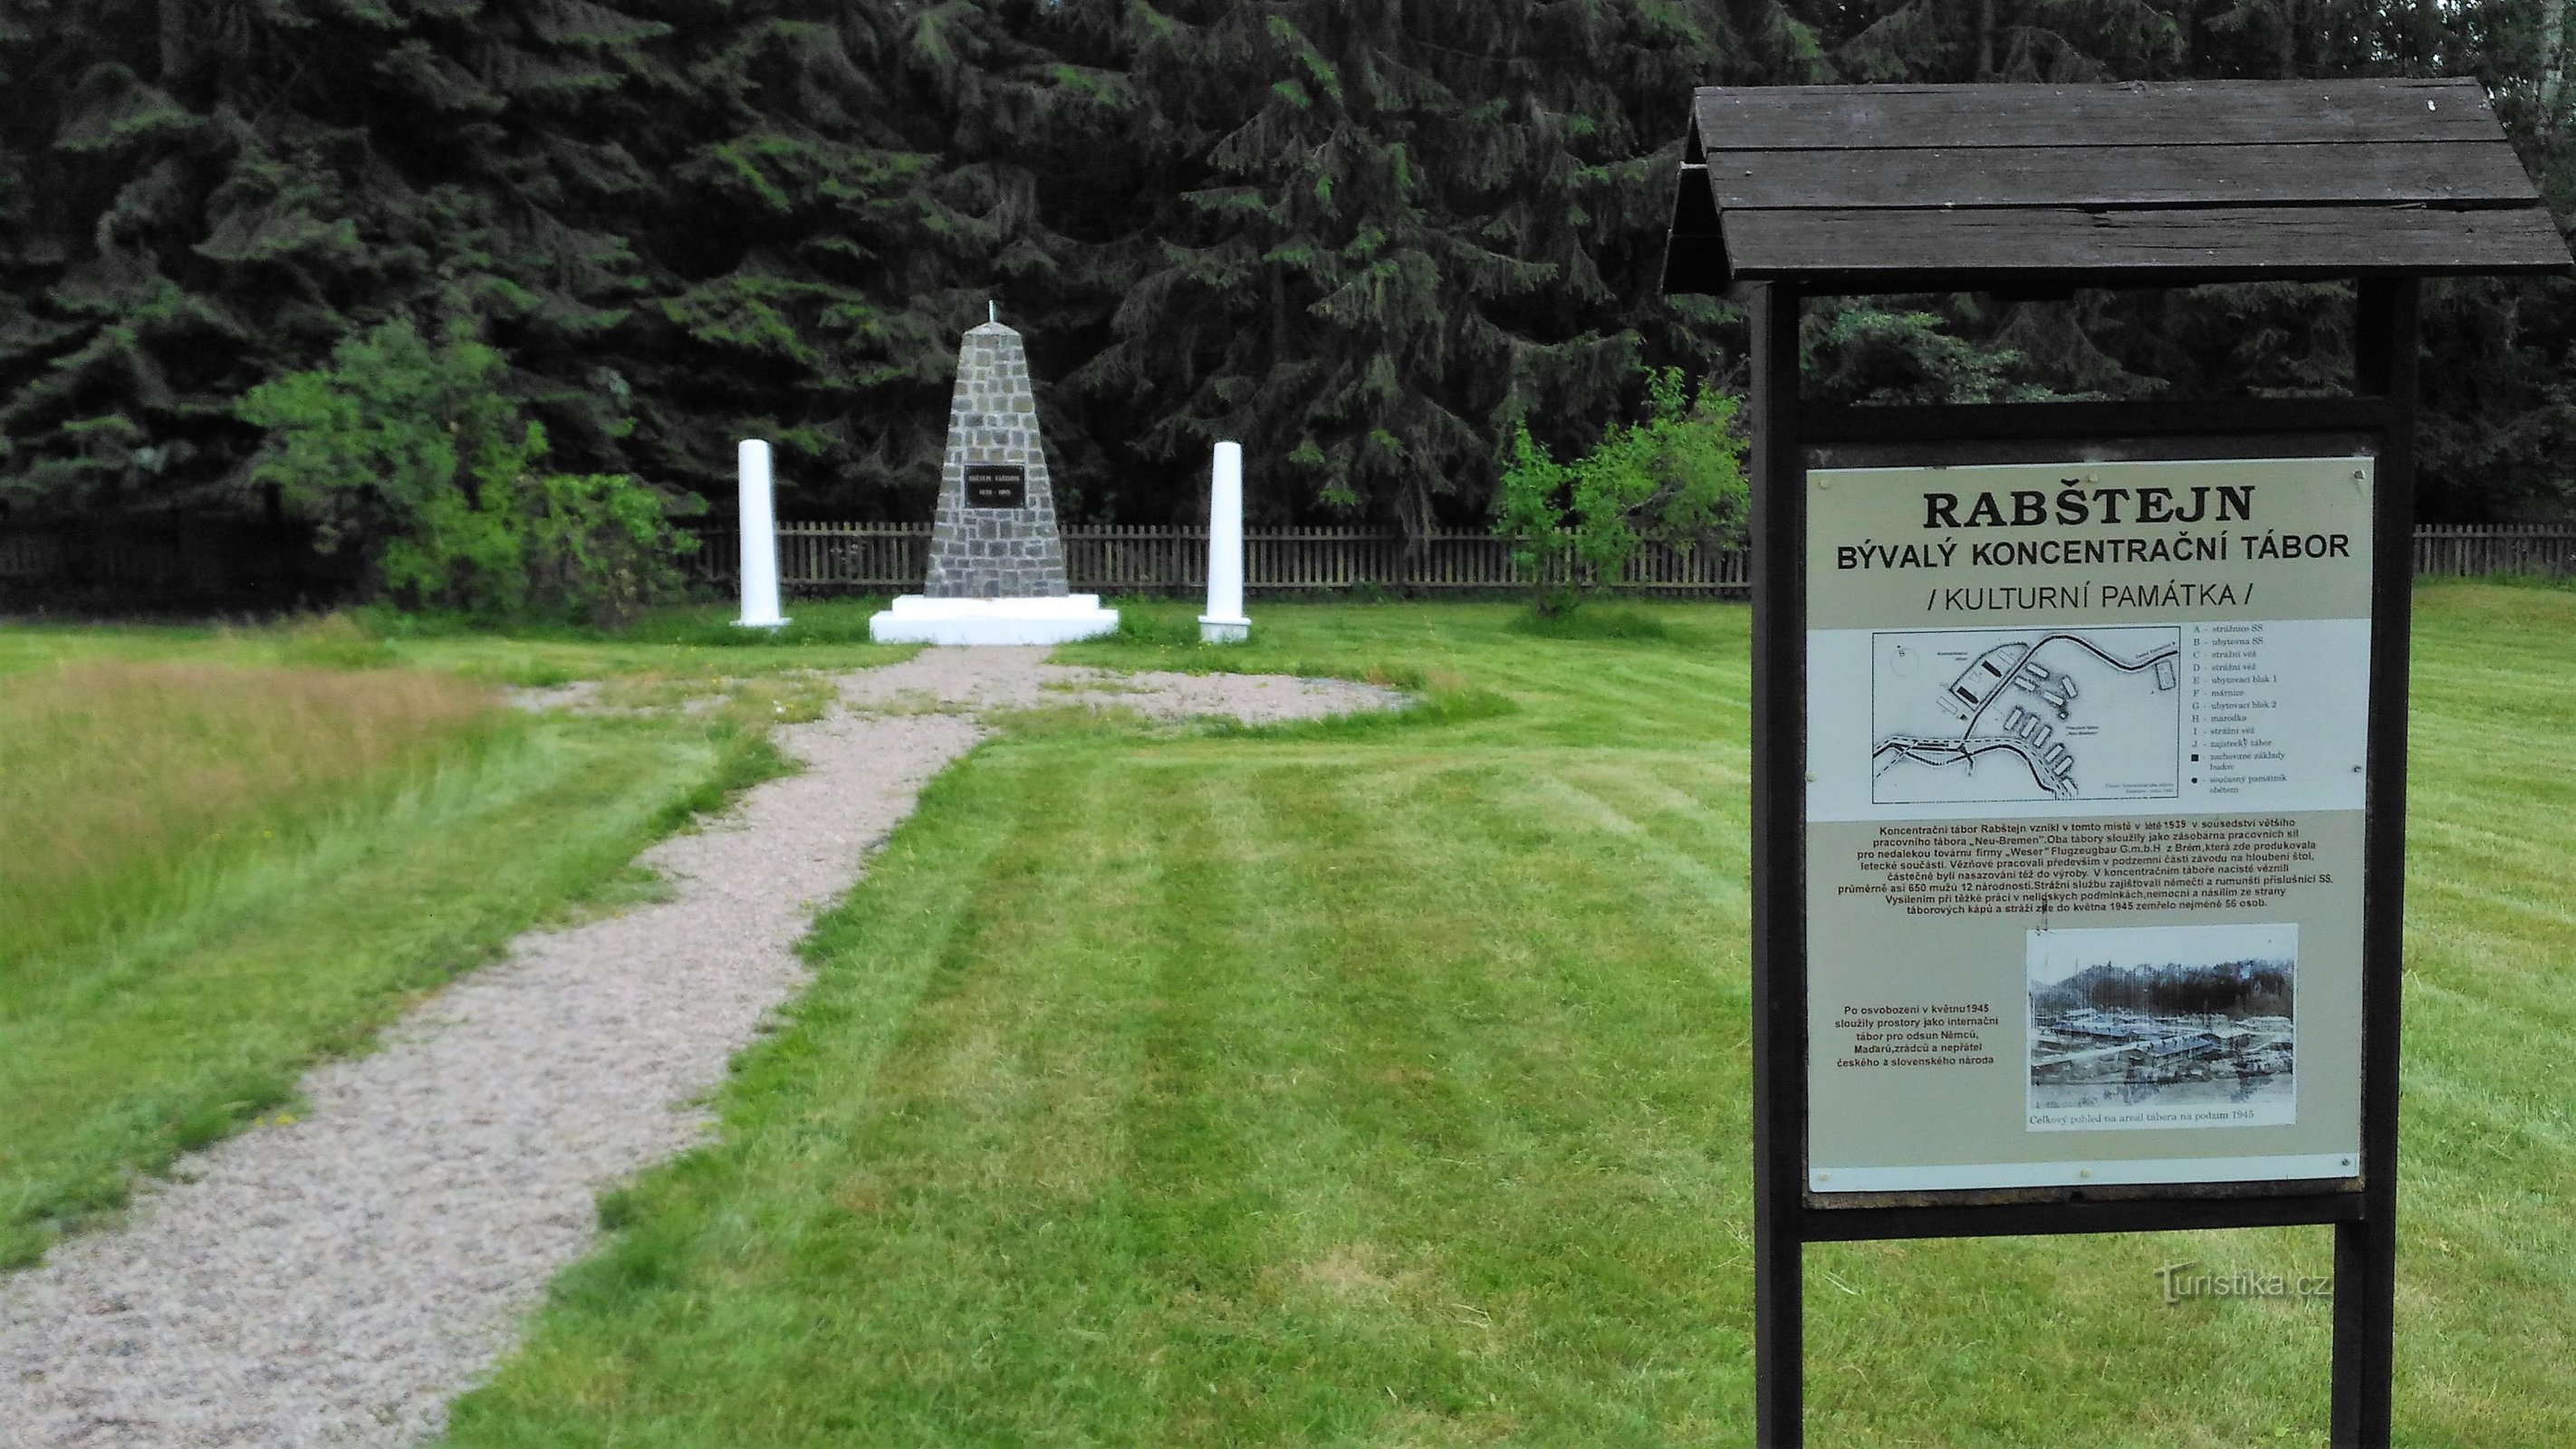 The monument of the former Rabštejn concentration camp.